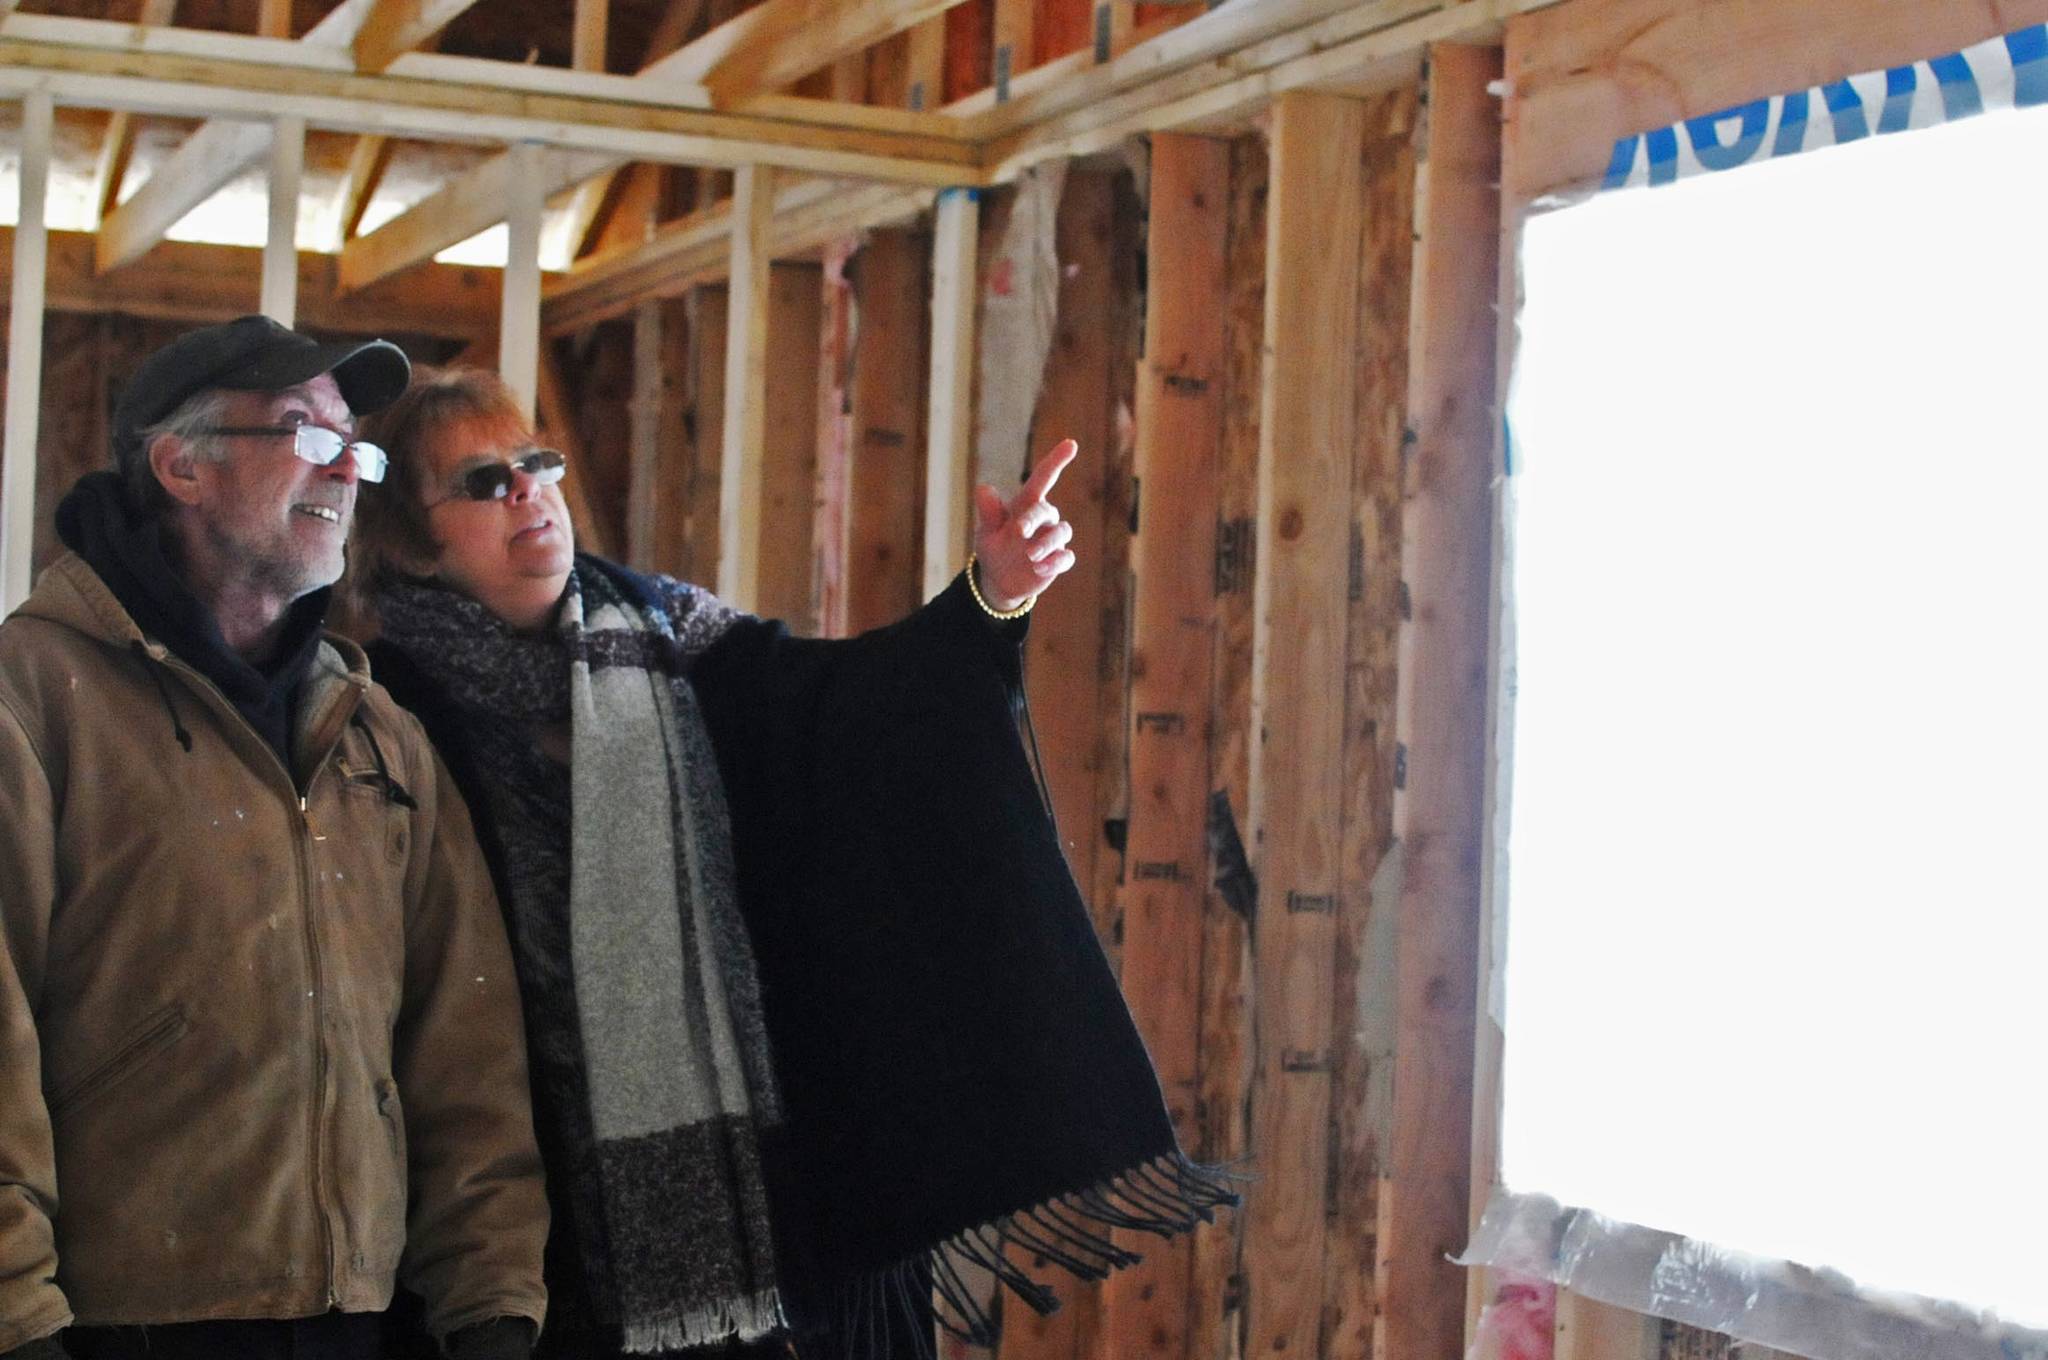 Contractor Ward Adams (left) and Nikiski resident Kimbra Mensch chat inside the shell of her home on Friday, March 9, 2018 in Nikiski, Alaska. Mensch, who moved to Nikiski from Wasilla, engaged a contractor to build her a home on Cabin Lake but is now having to tear it down because of mistakes in the construction. (Photo by Elizabeth Earl/Peninsula Clarion)